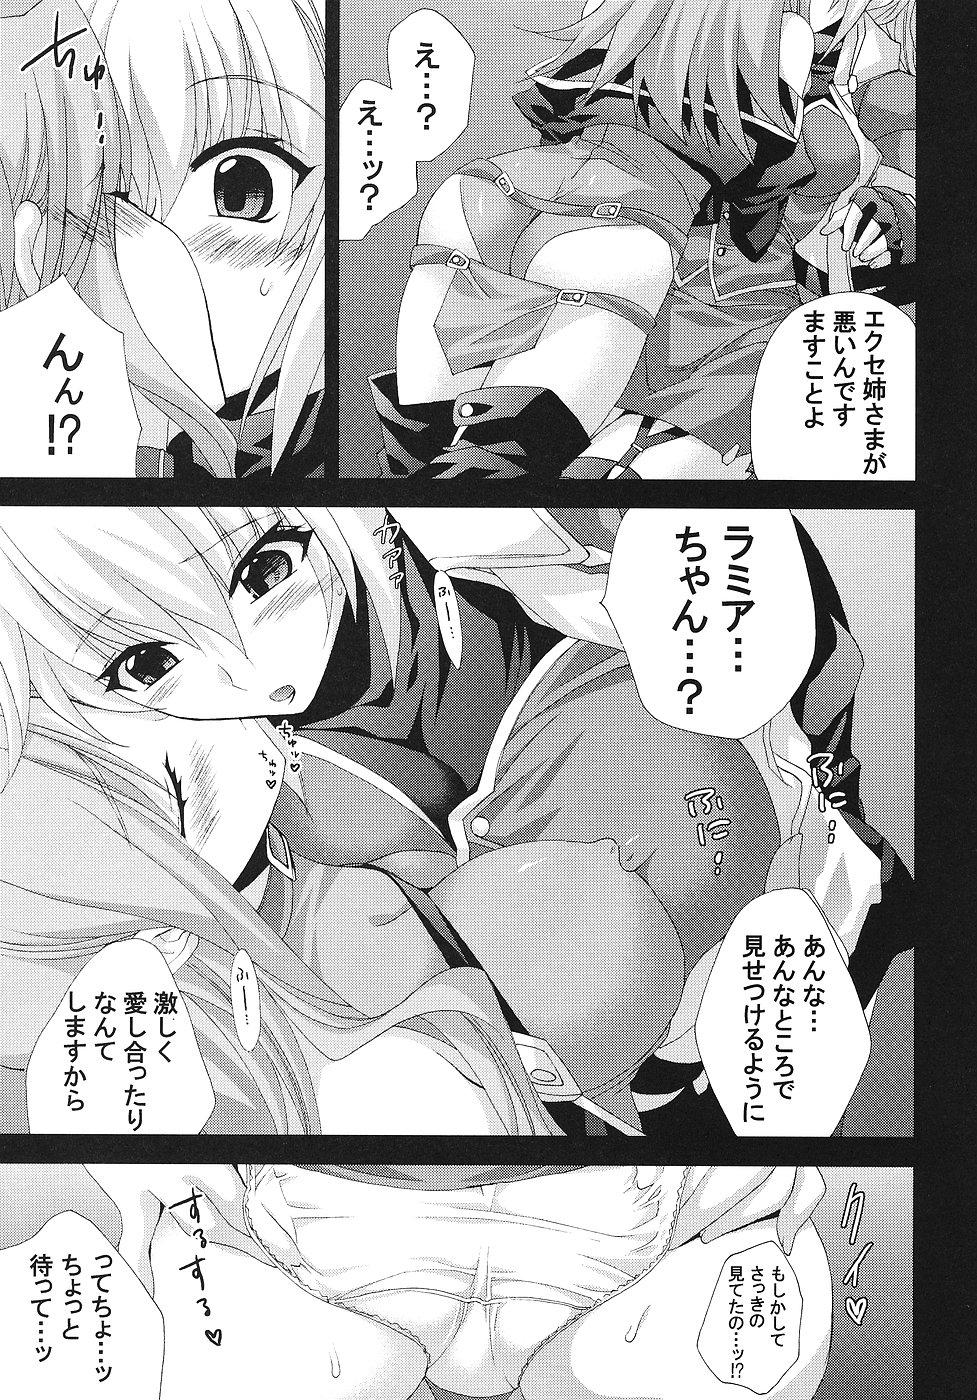 Bear Night and day - Super robot wars Anal Sex - Page 6